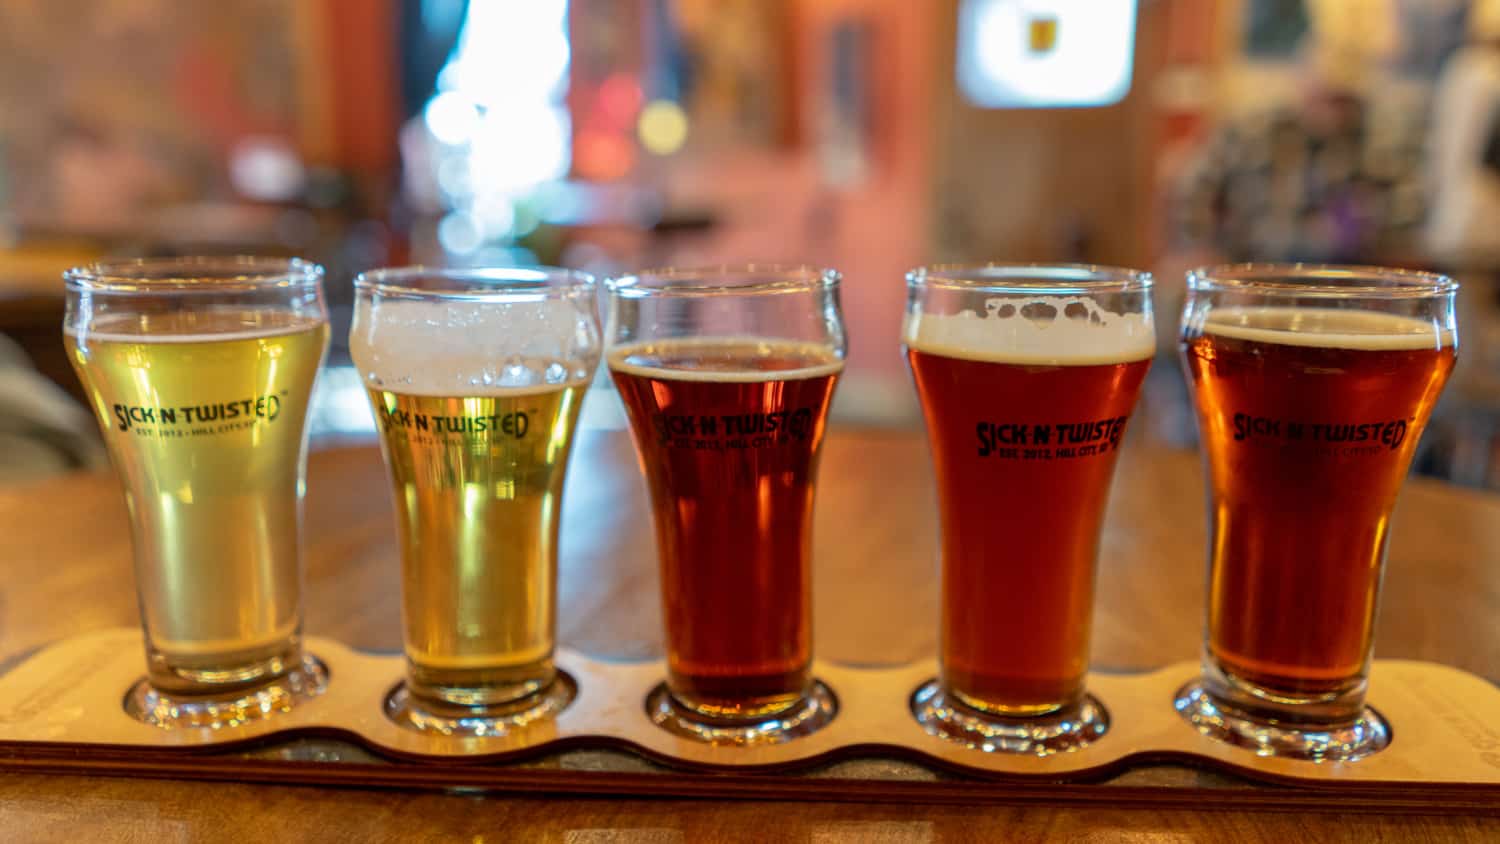 A flight of beers from pet-friendly Sick-N-Twisted Brewing in Hill City, SD